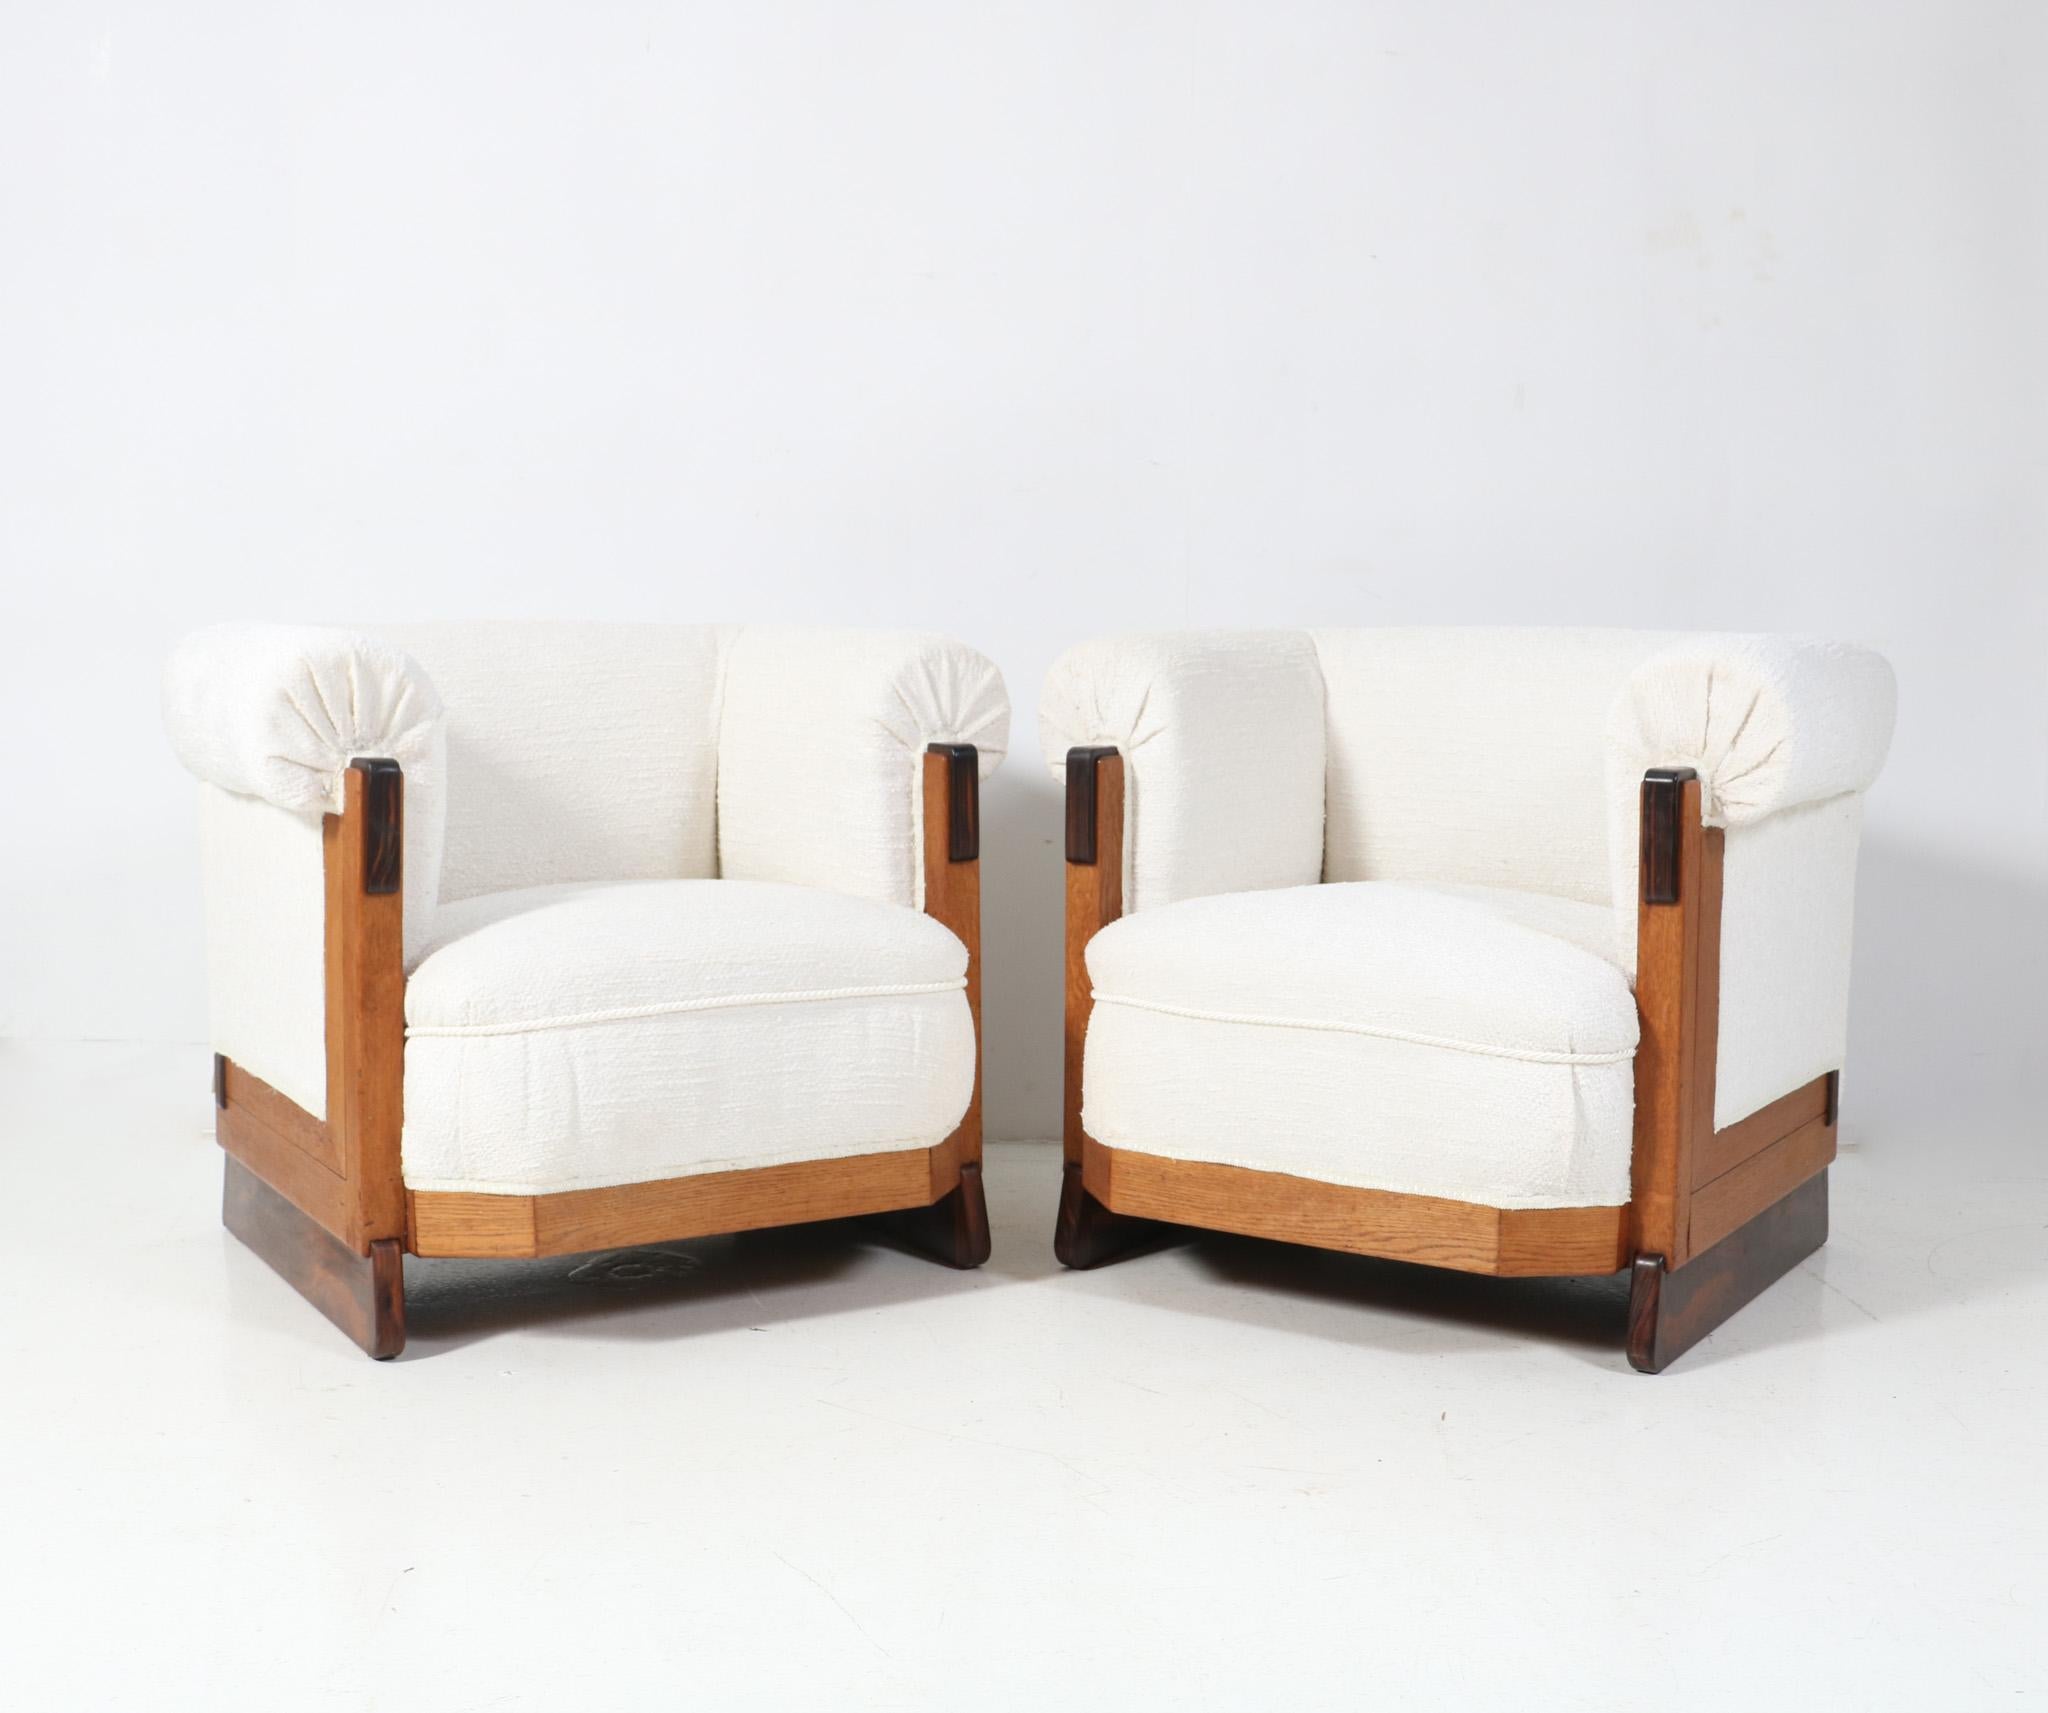 Two Art Deco Modernist Oak Lounge Chairs in Bouclé by Anton Lucas Leiden, 1920s In Good Condition For Sale In Amsterdam, NL